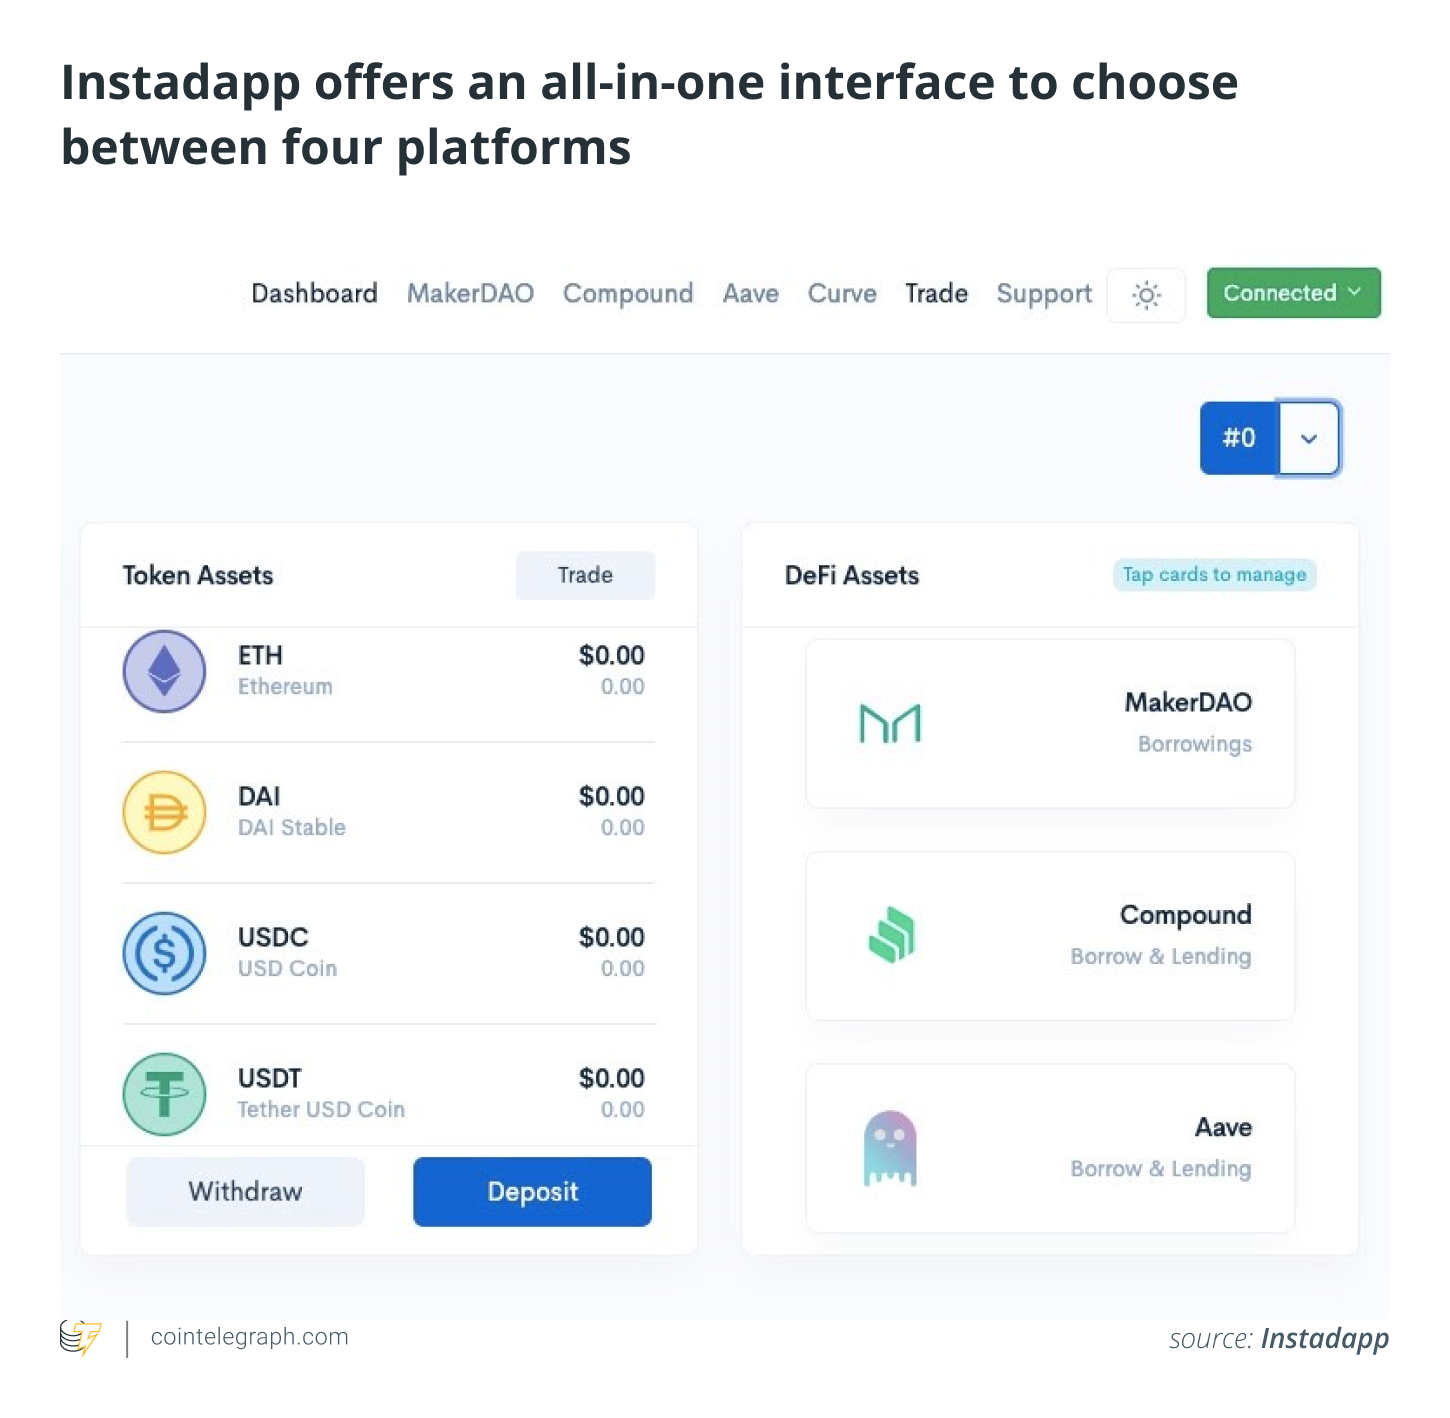 Instadapp offers an all-in-one interface to choose between four platforms